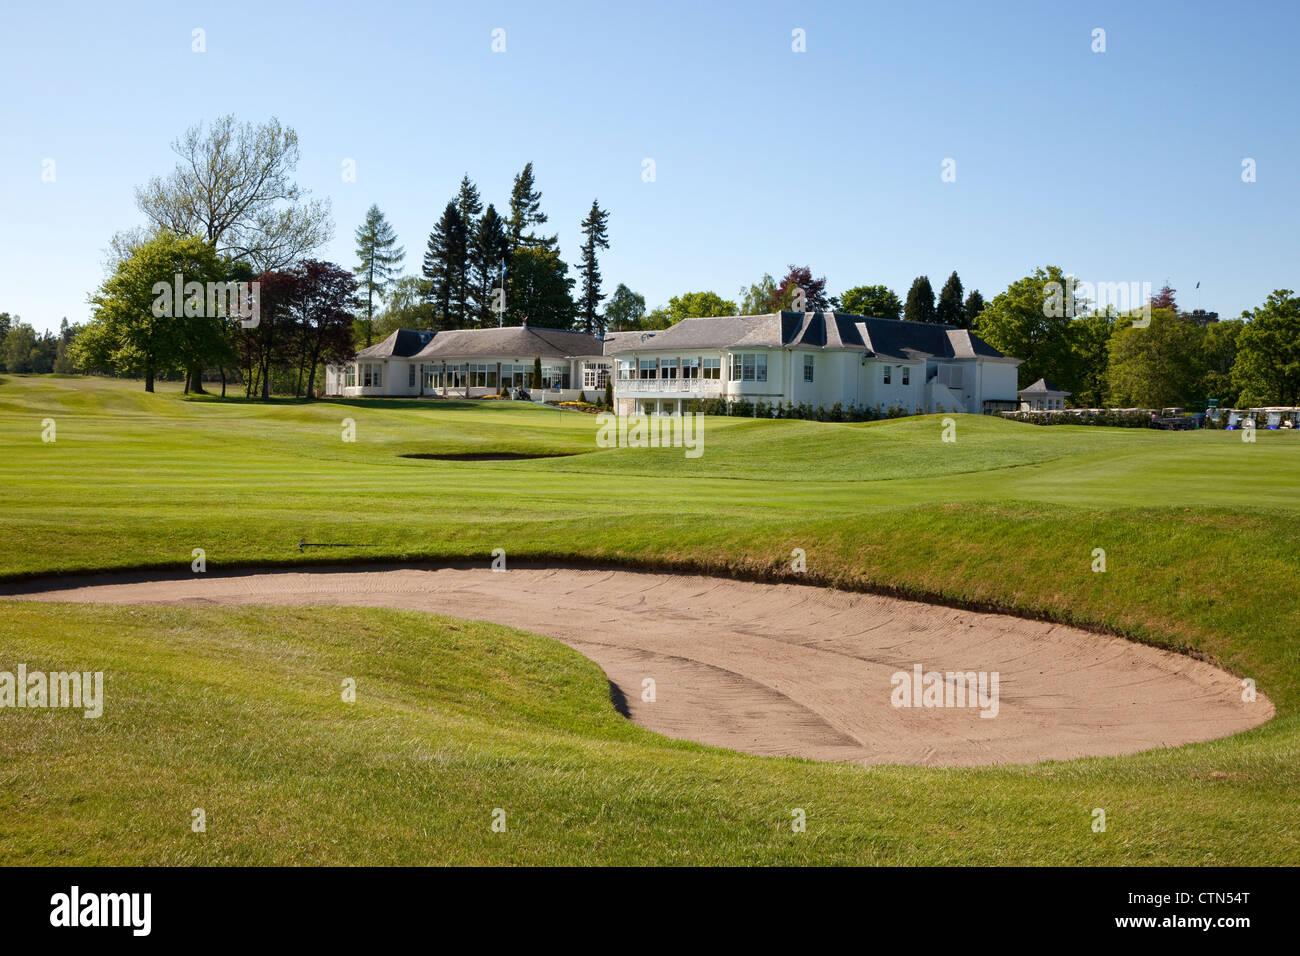 18th fairway, Kings Course, Gleneagles with the Dormie House restaurant and Club rooms Gleneagles, Scotland, UK, Great Britain Stock Photo